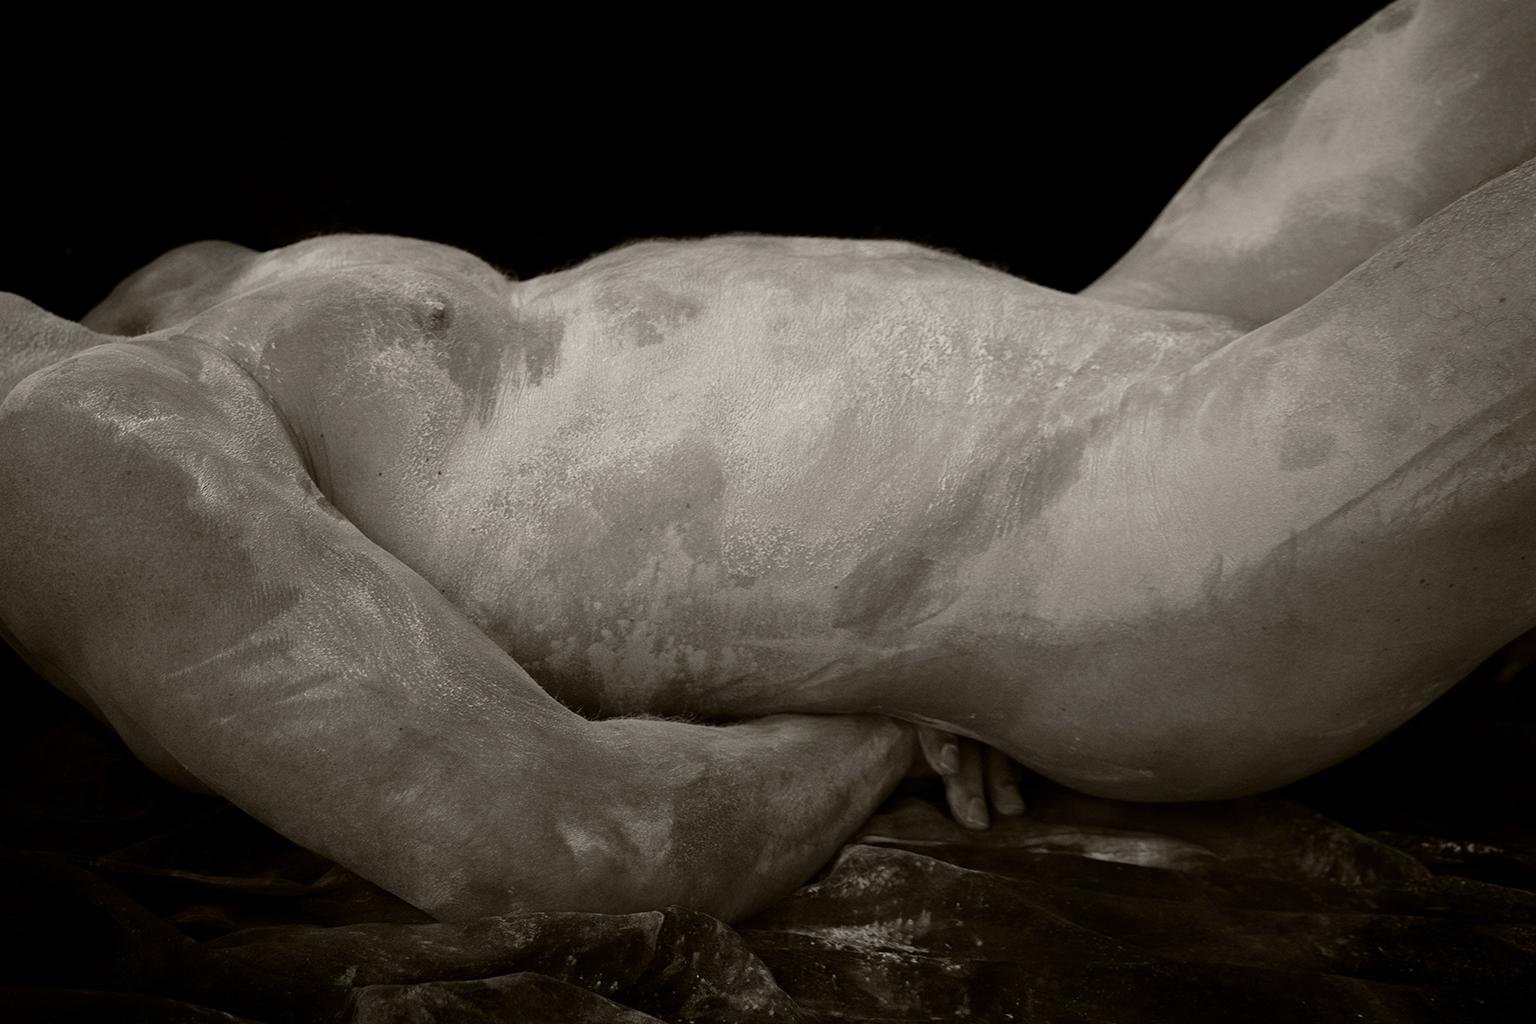 Ricky Cohete Nude Photograph - Sculpture of Cornelio, 2. Male Nude. Black and White Limited Edition Photograph